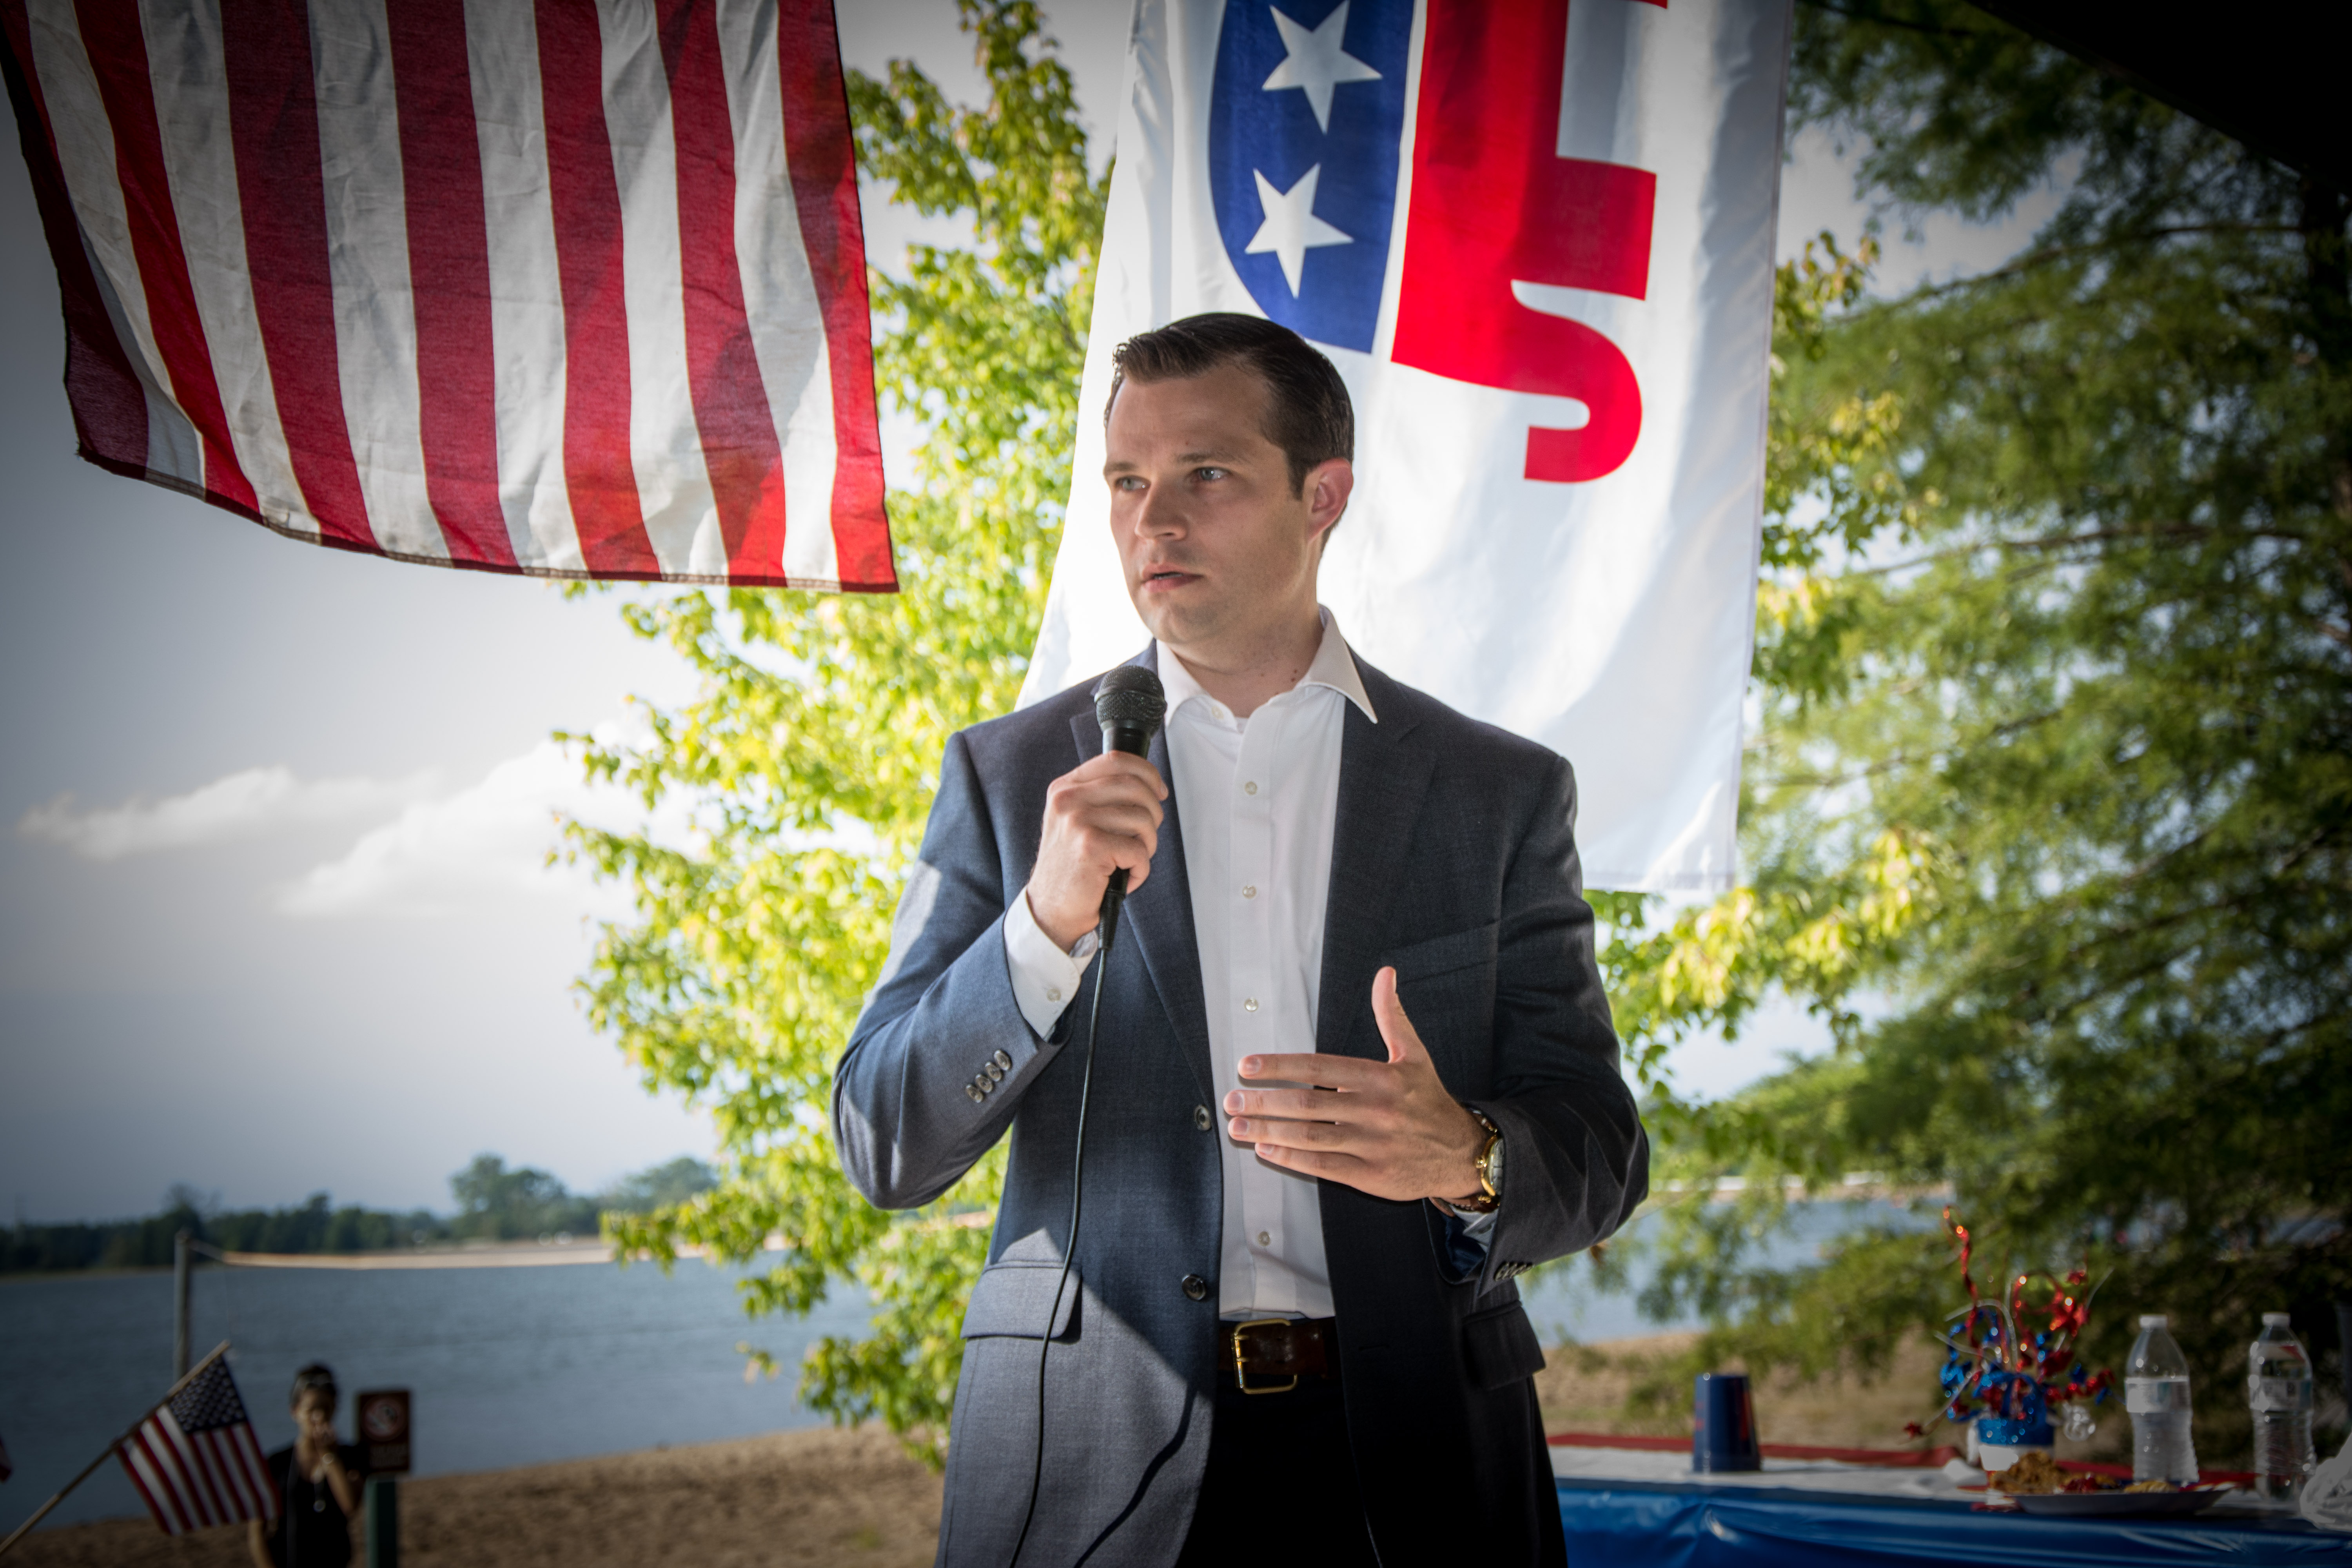 St. Louis County Republican Central Committee Picnic | St. Louis County GOP